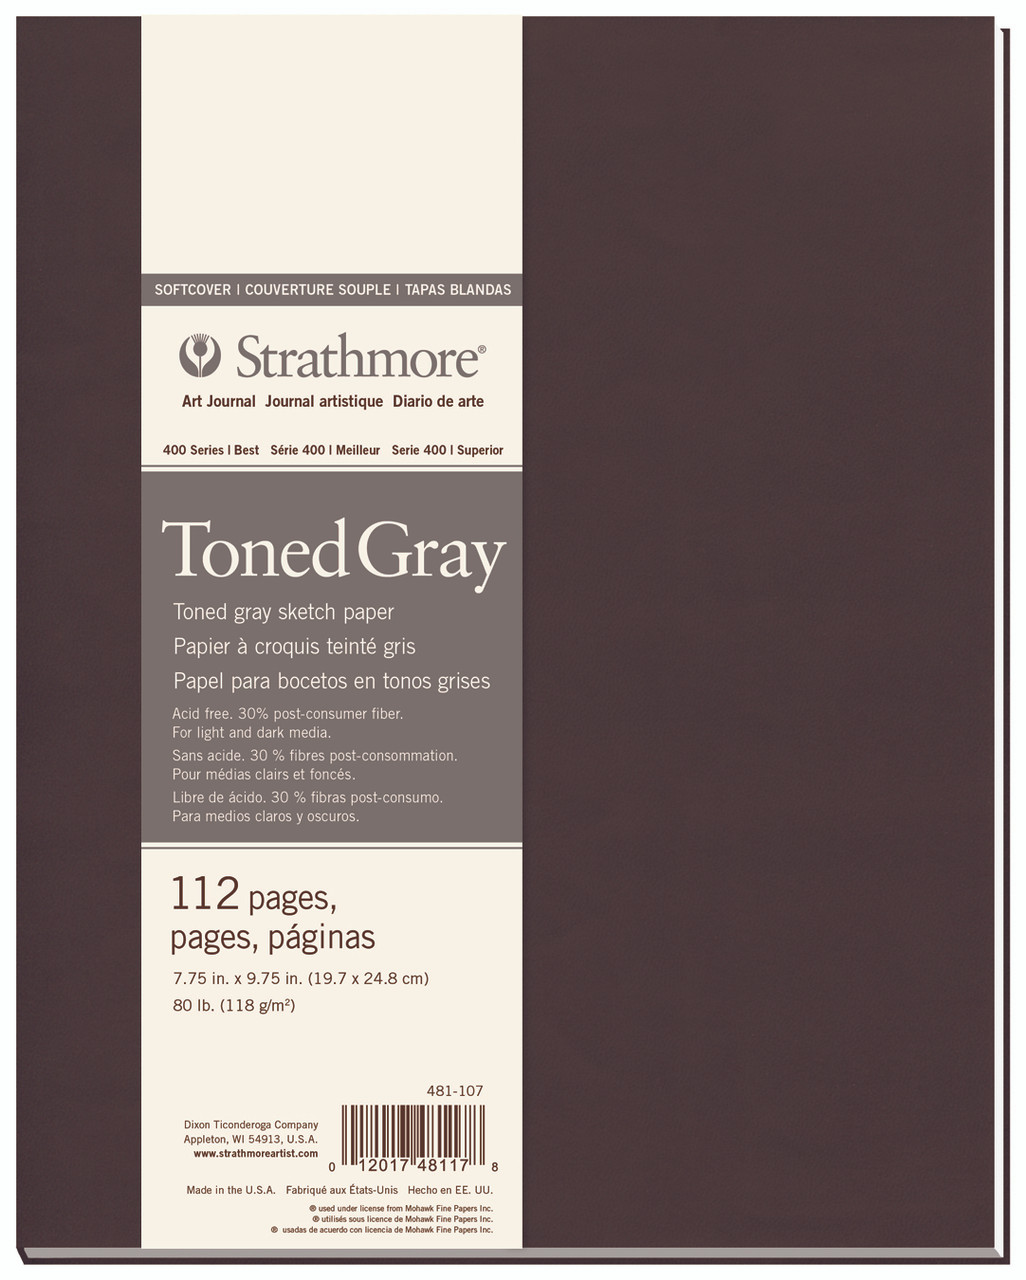 Strathmore 400 Toned Softcover Book 56 sheets 118gsm 19.7 x 24.8 cm Grey Paper